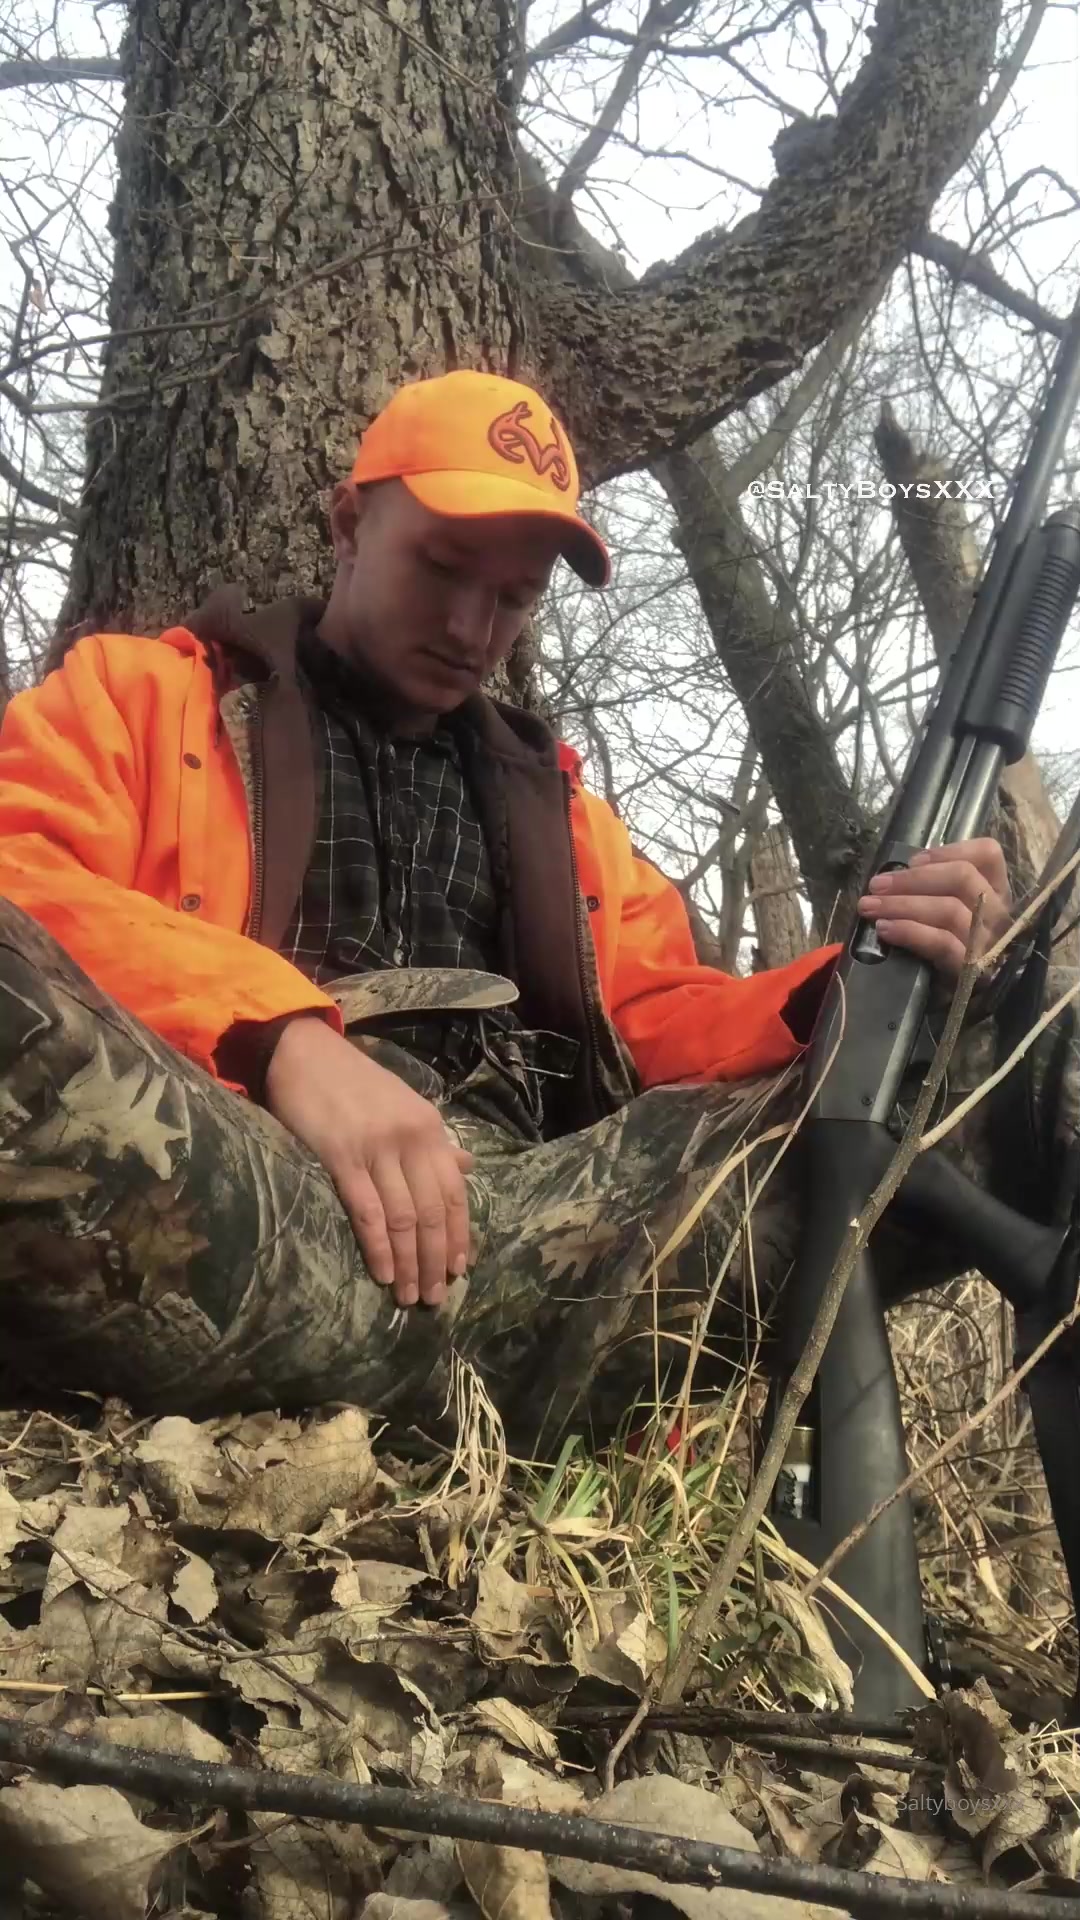 Hunting bro cums on gun and licks it off like any good conservative would